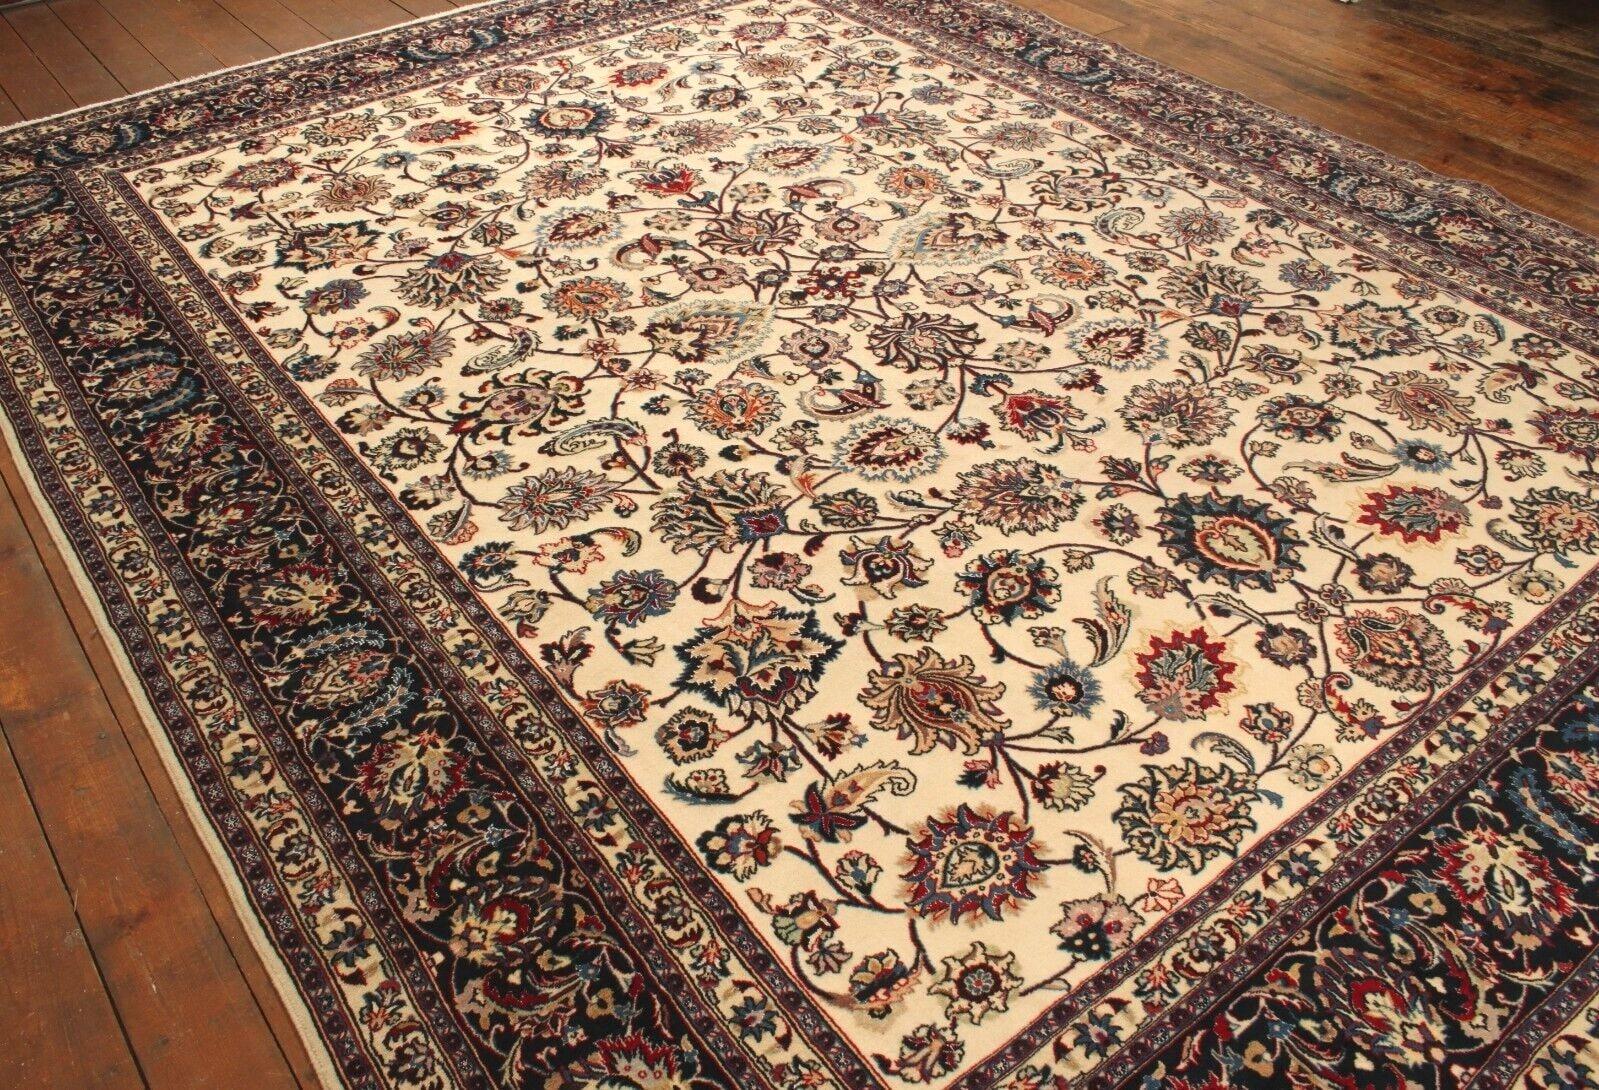 Handmade Contemporary Persian Style Tabriz Rug 10' x 12.7', 2000s - 1T04 For Sale 3